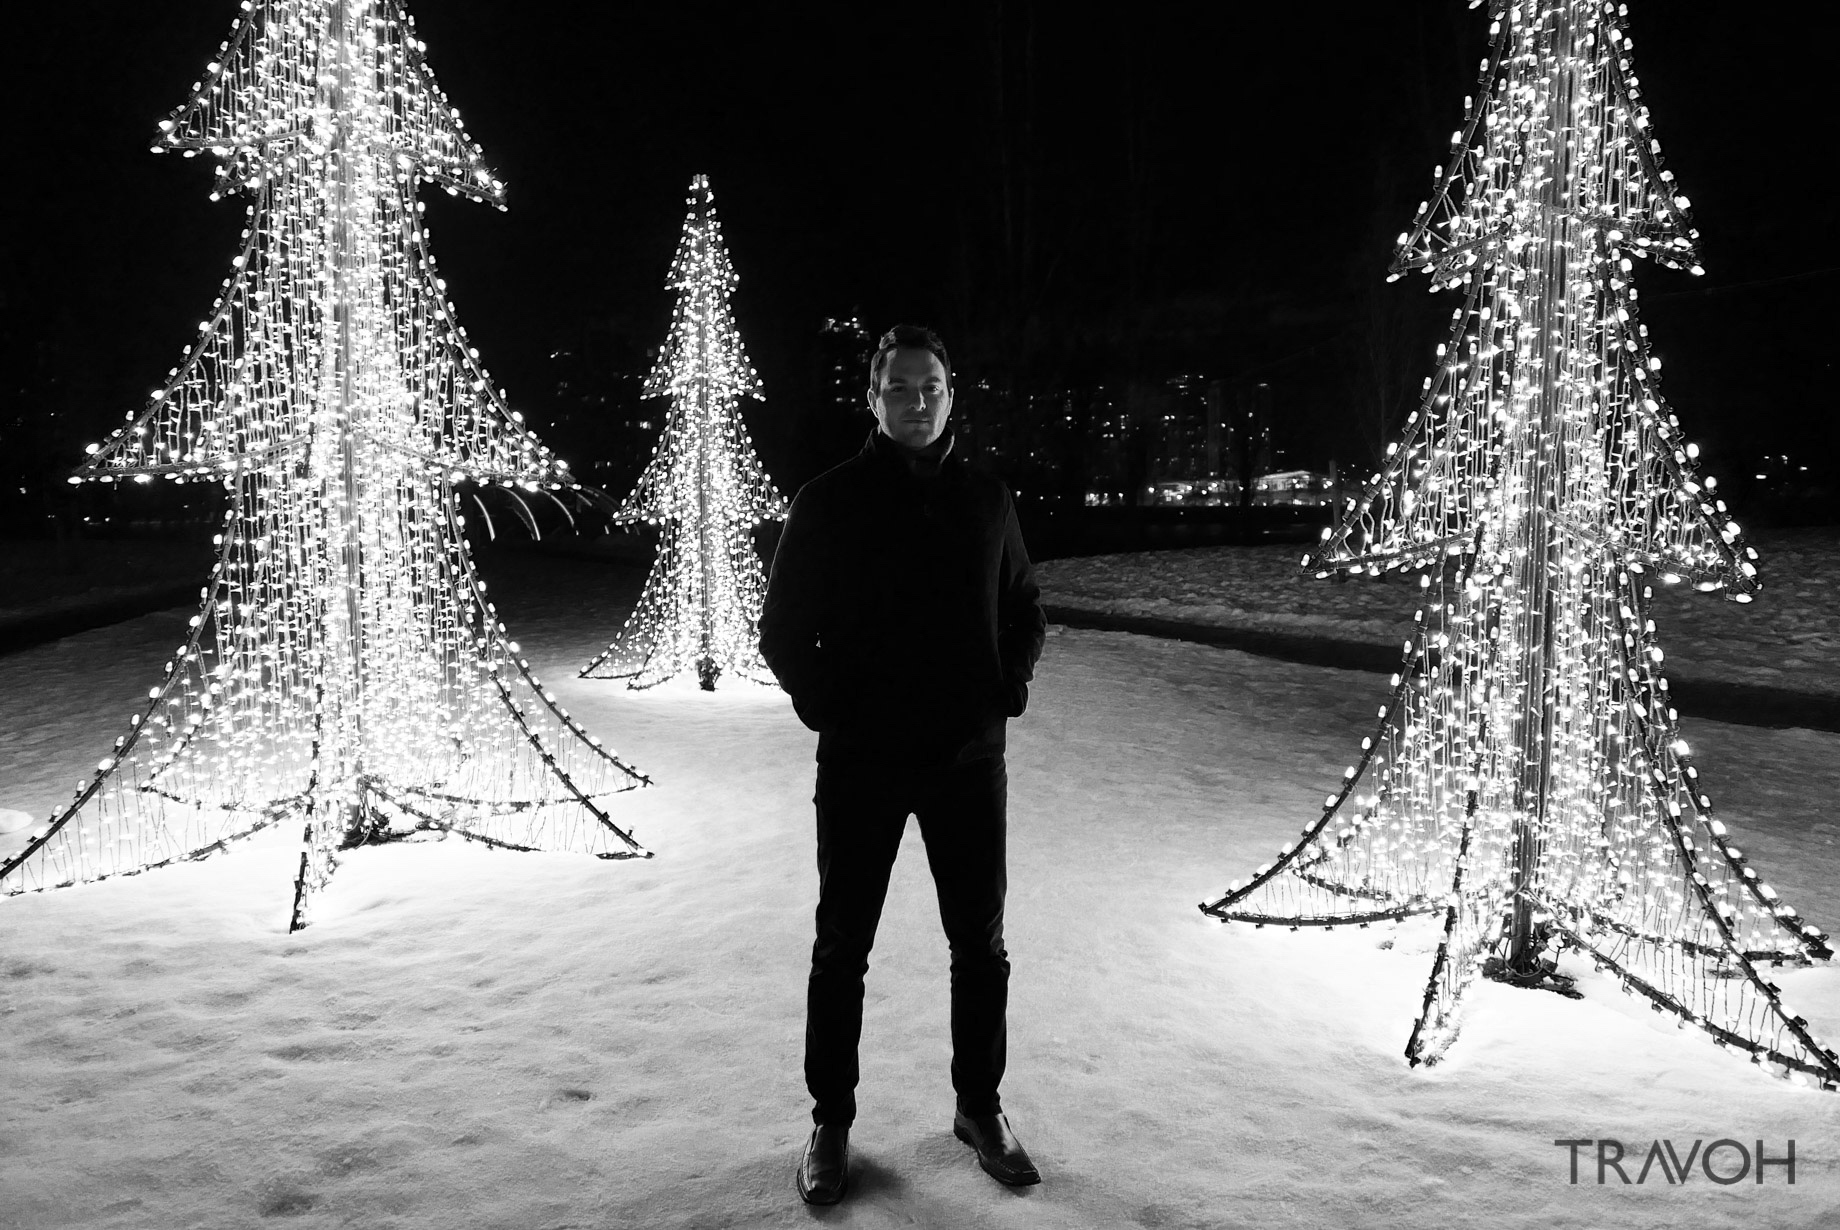 Marcus Anthony - Lafarge Winter Lights Display - Winter Christmas Trees - Coquitlam, BC, Canada